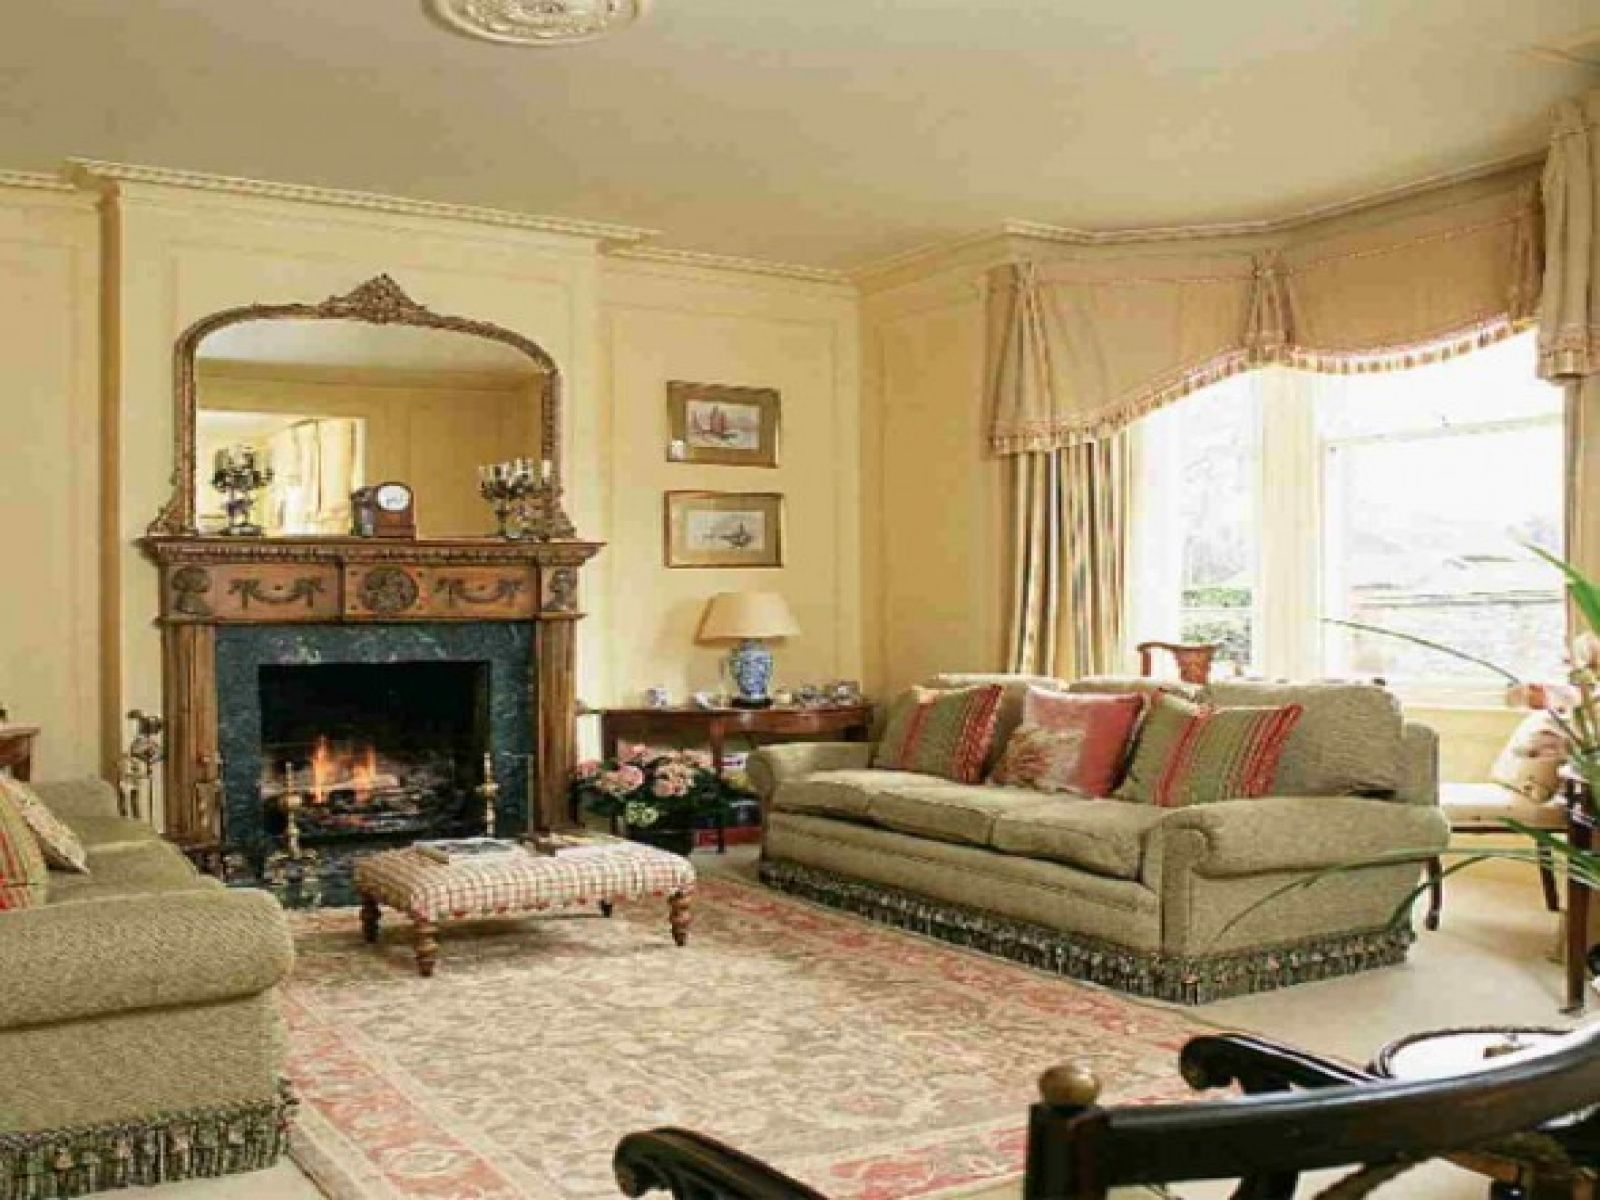 Furniture Floral French Country Sofa With Wood Legs For Chic Home Throughout Country Sofas And Chairs (View 15 of 15)